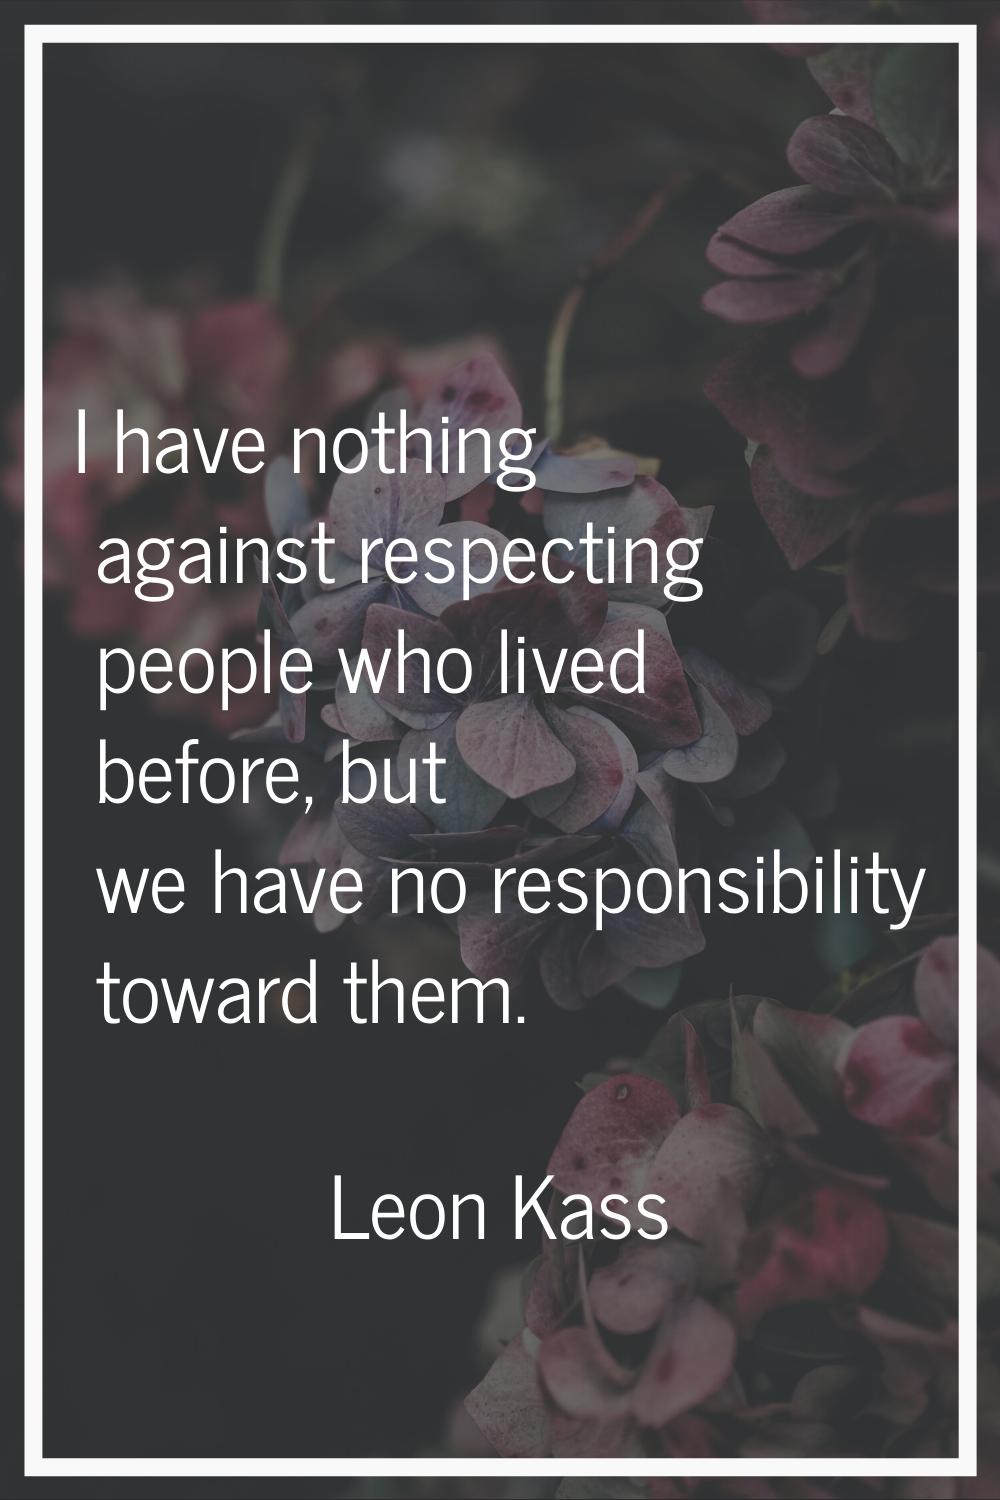 I have nothing against respecting people who lived before, but we have no responsibility toward the